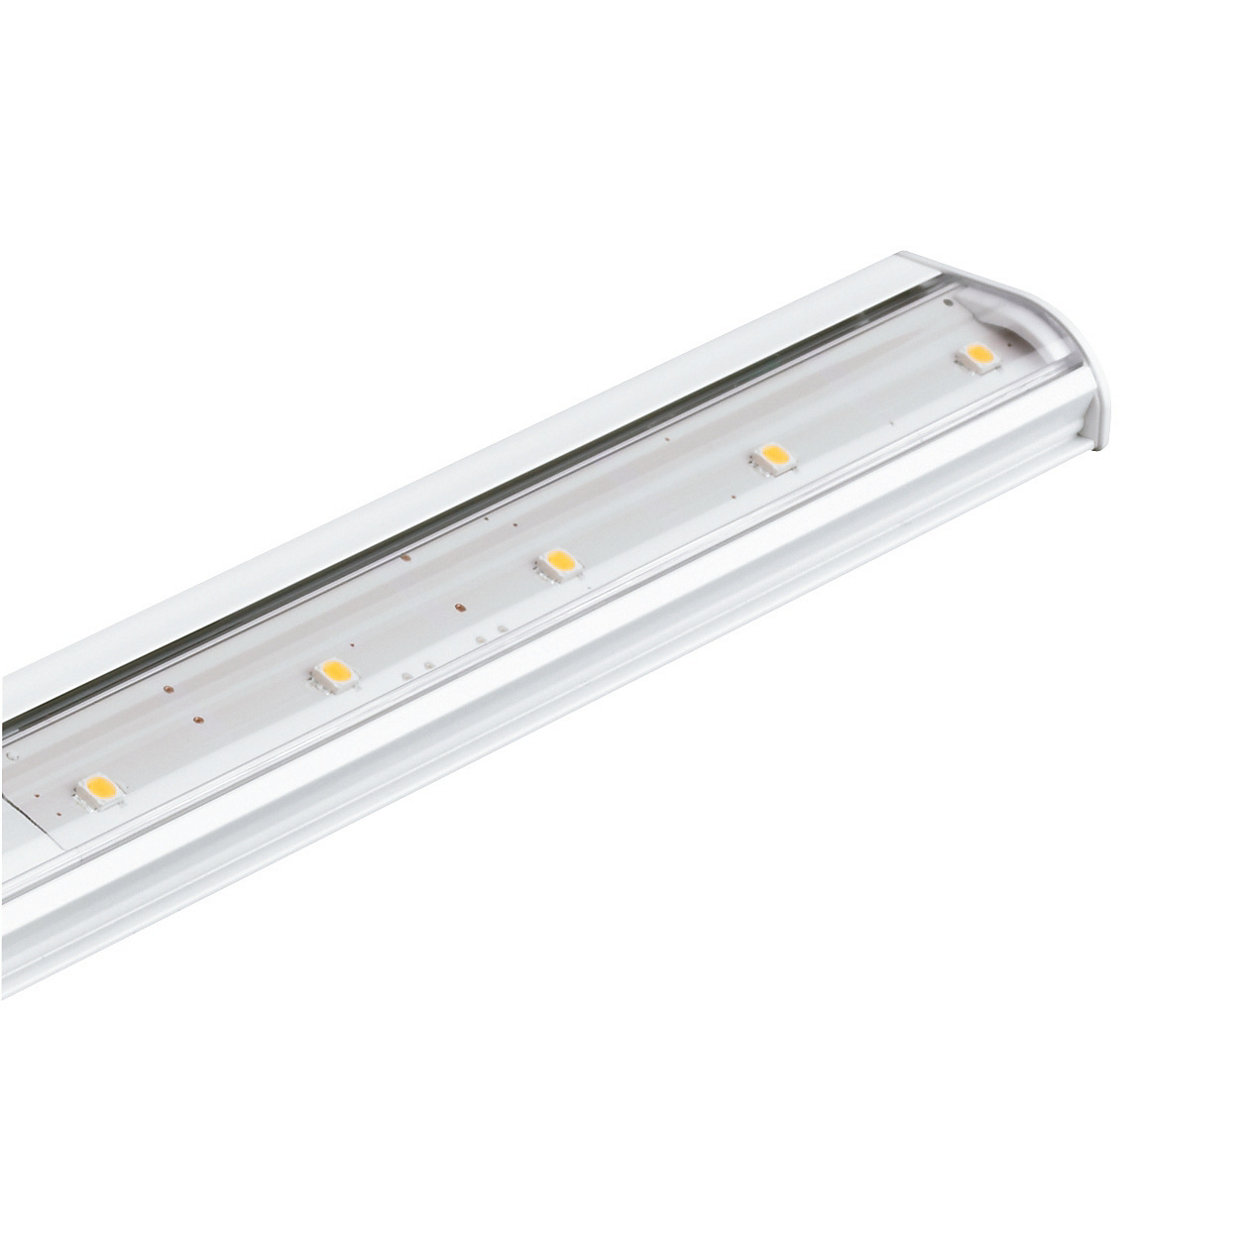 eW Profile Powercore – Ultra-low-profile LED under-cabinet luminaire for task and accent lighting